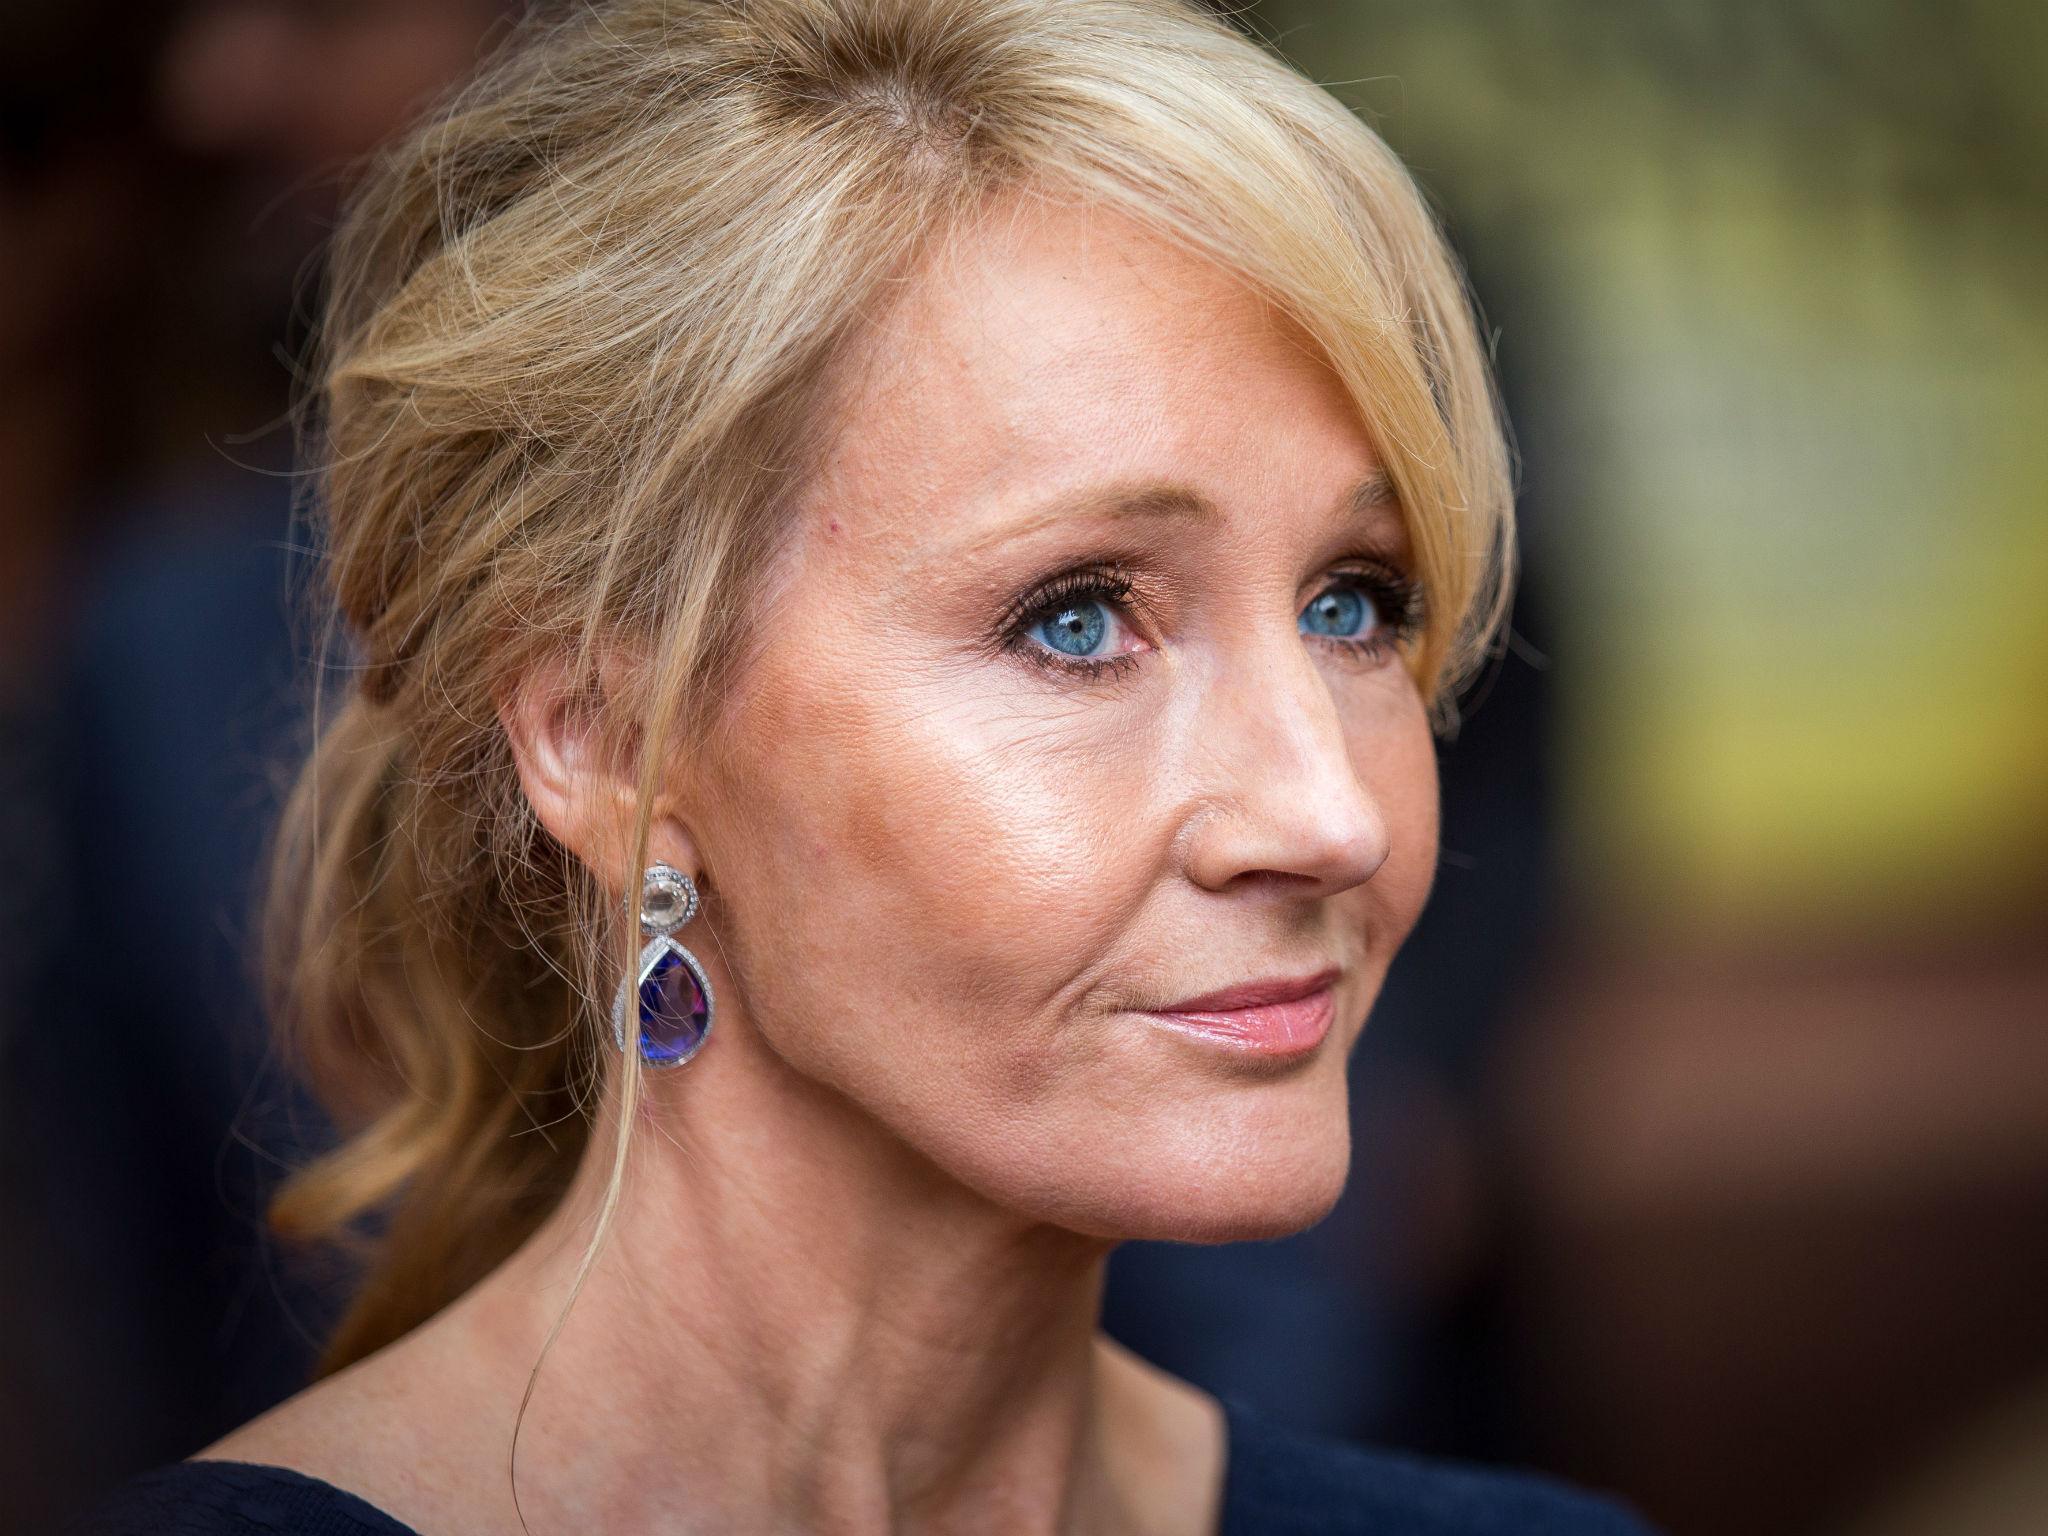 JK Rowling provokes anger for defending last Labour Government